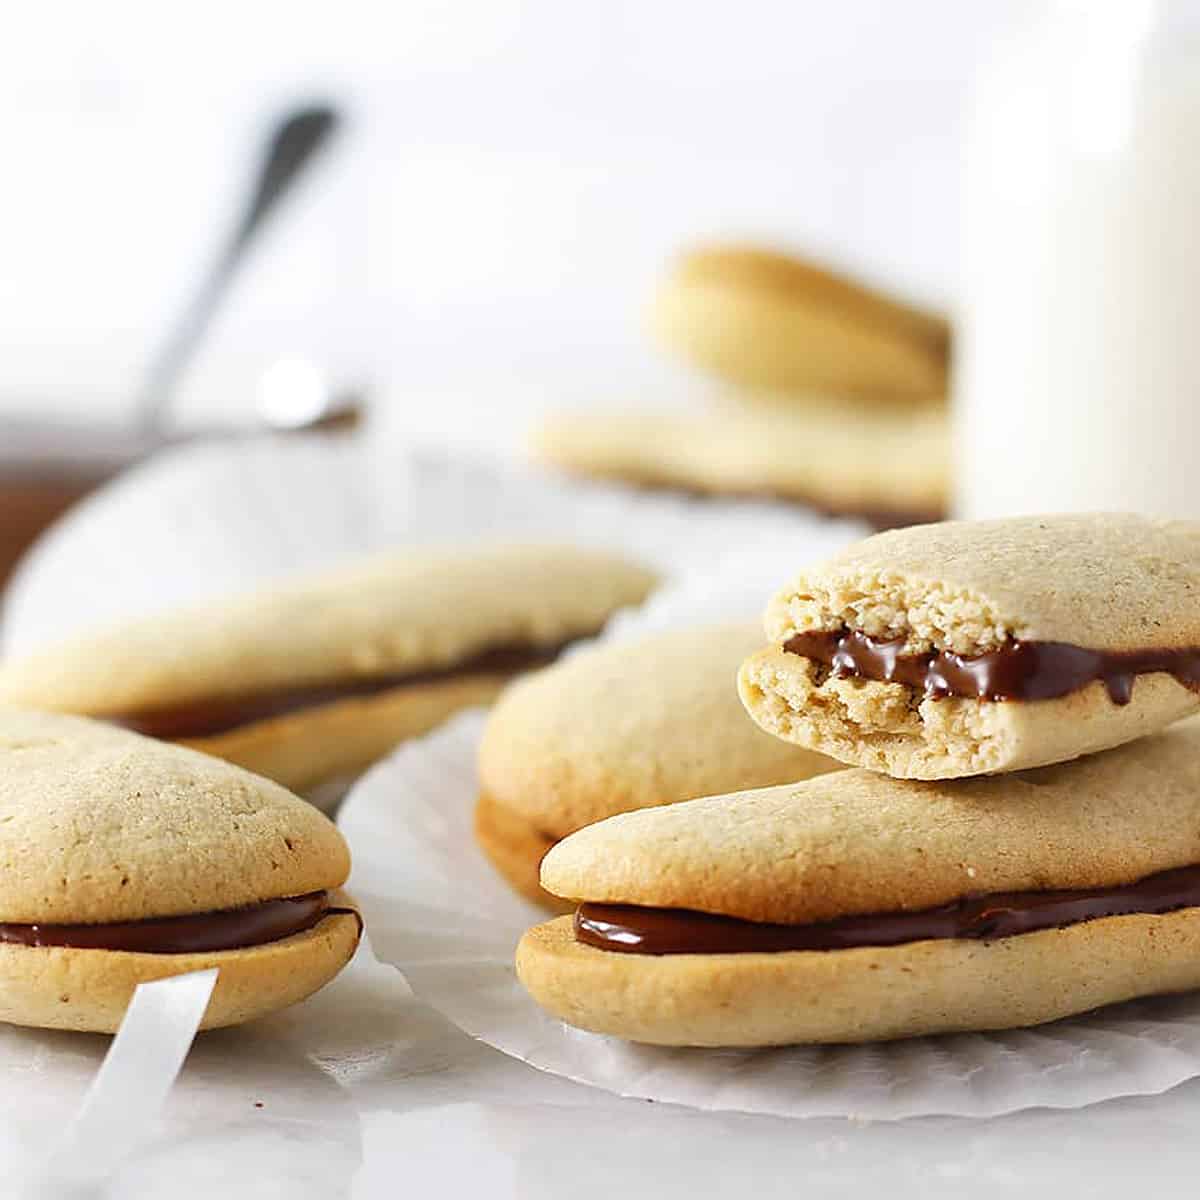 milano cookies stacked and one with a bite